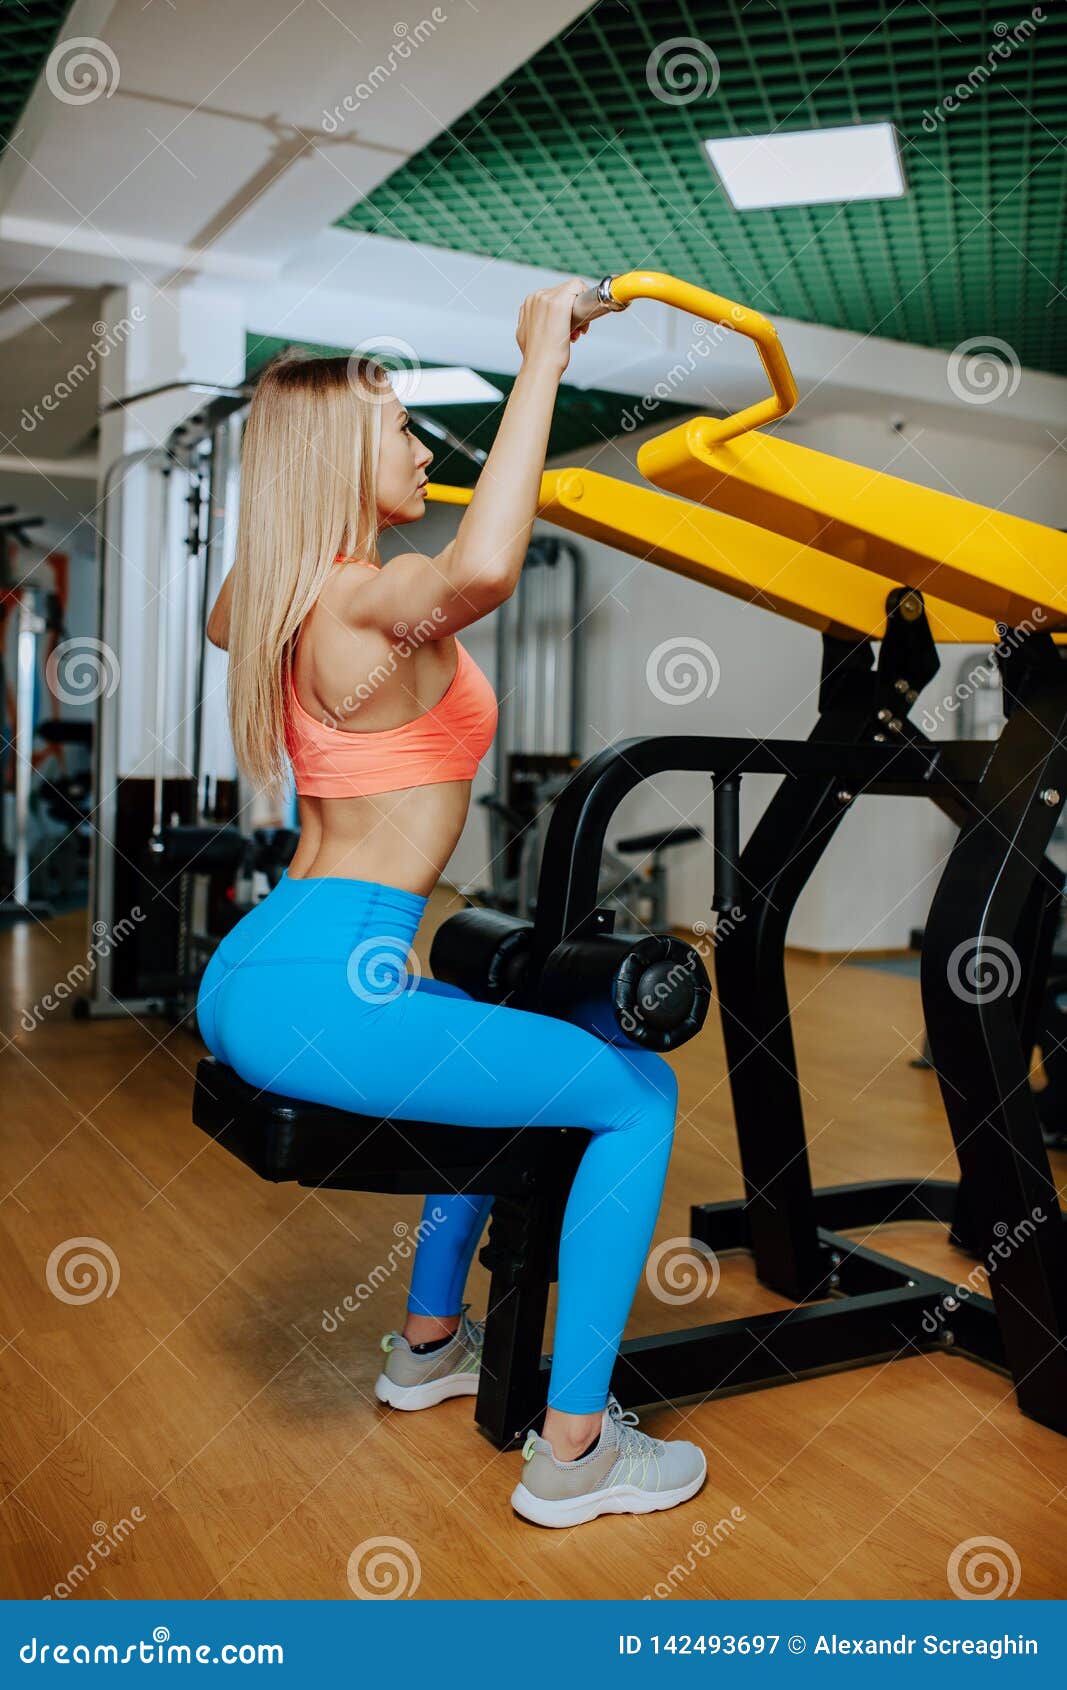 https://thumbs.dreamstime.com/z/fit-young-blonde-woman-working-lat-pulldown-machine-gym-fit-young-blonde-woman-working-lat-pulldown-machine-142493697.jpg